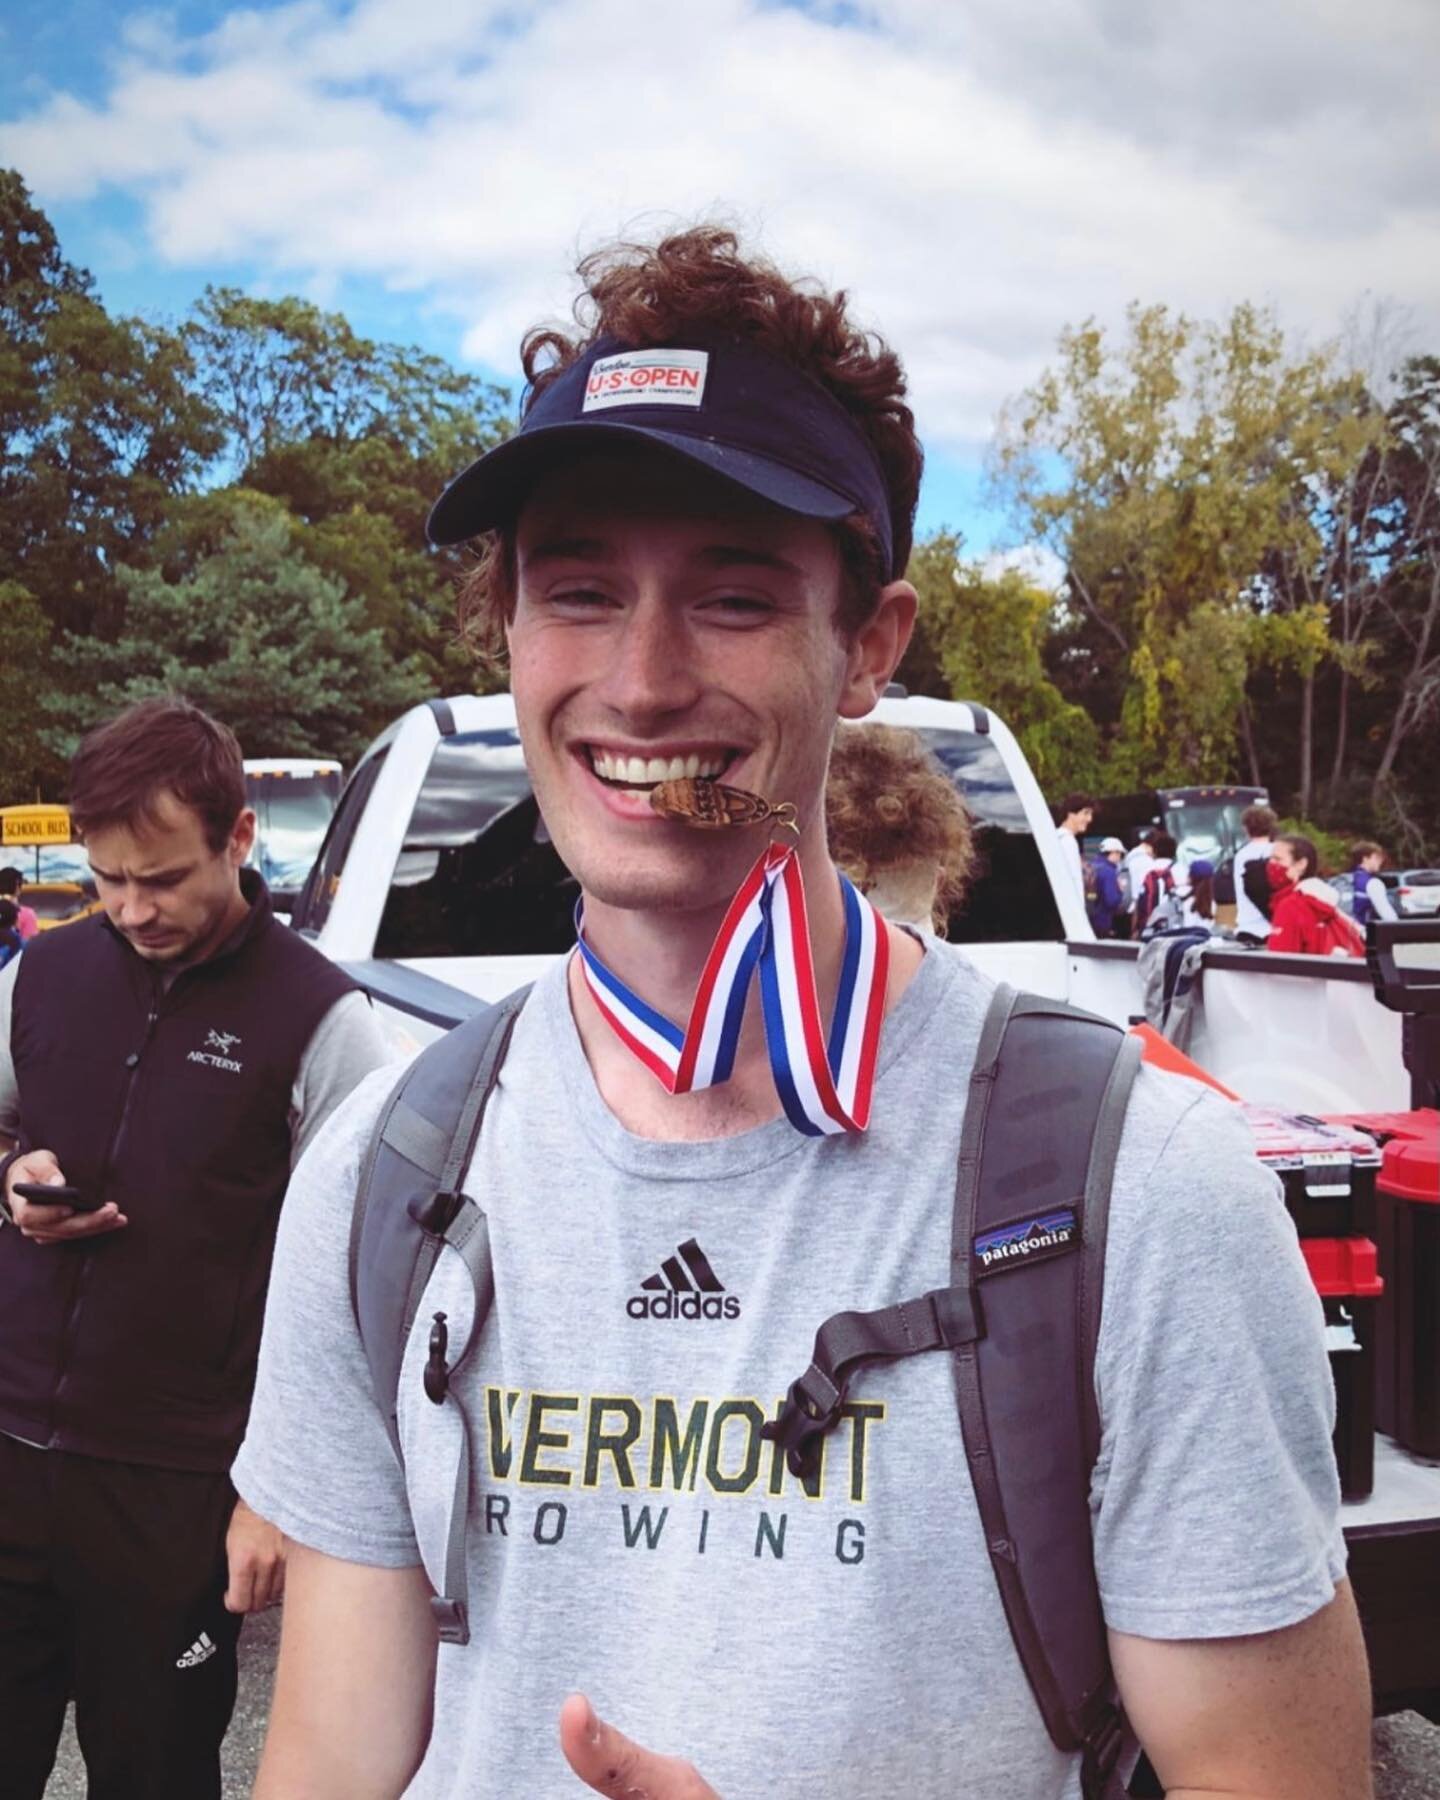 Our next senior shoutout goes to Sam Pasqualoni. Sam joined rowing 2 years ago in 2020 and since then has medaled at the 2021 Head of the Snake and re-qualified in the men&rsquo;s 1V4+ at the 2021 Head of the Charles.

Outside of rowing, Sam is a Neu